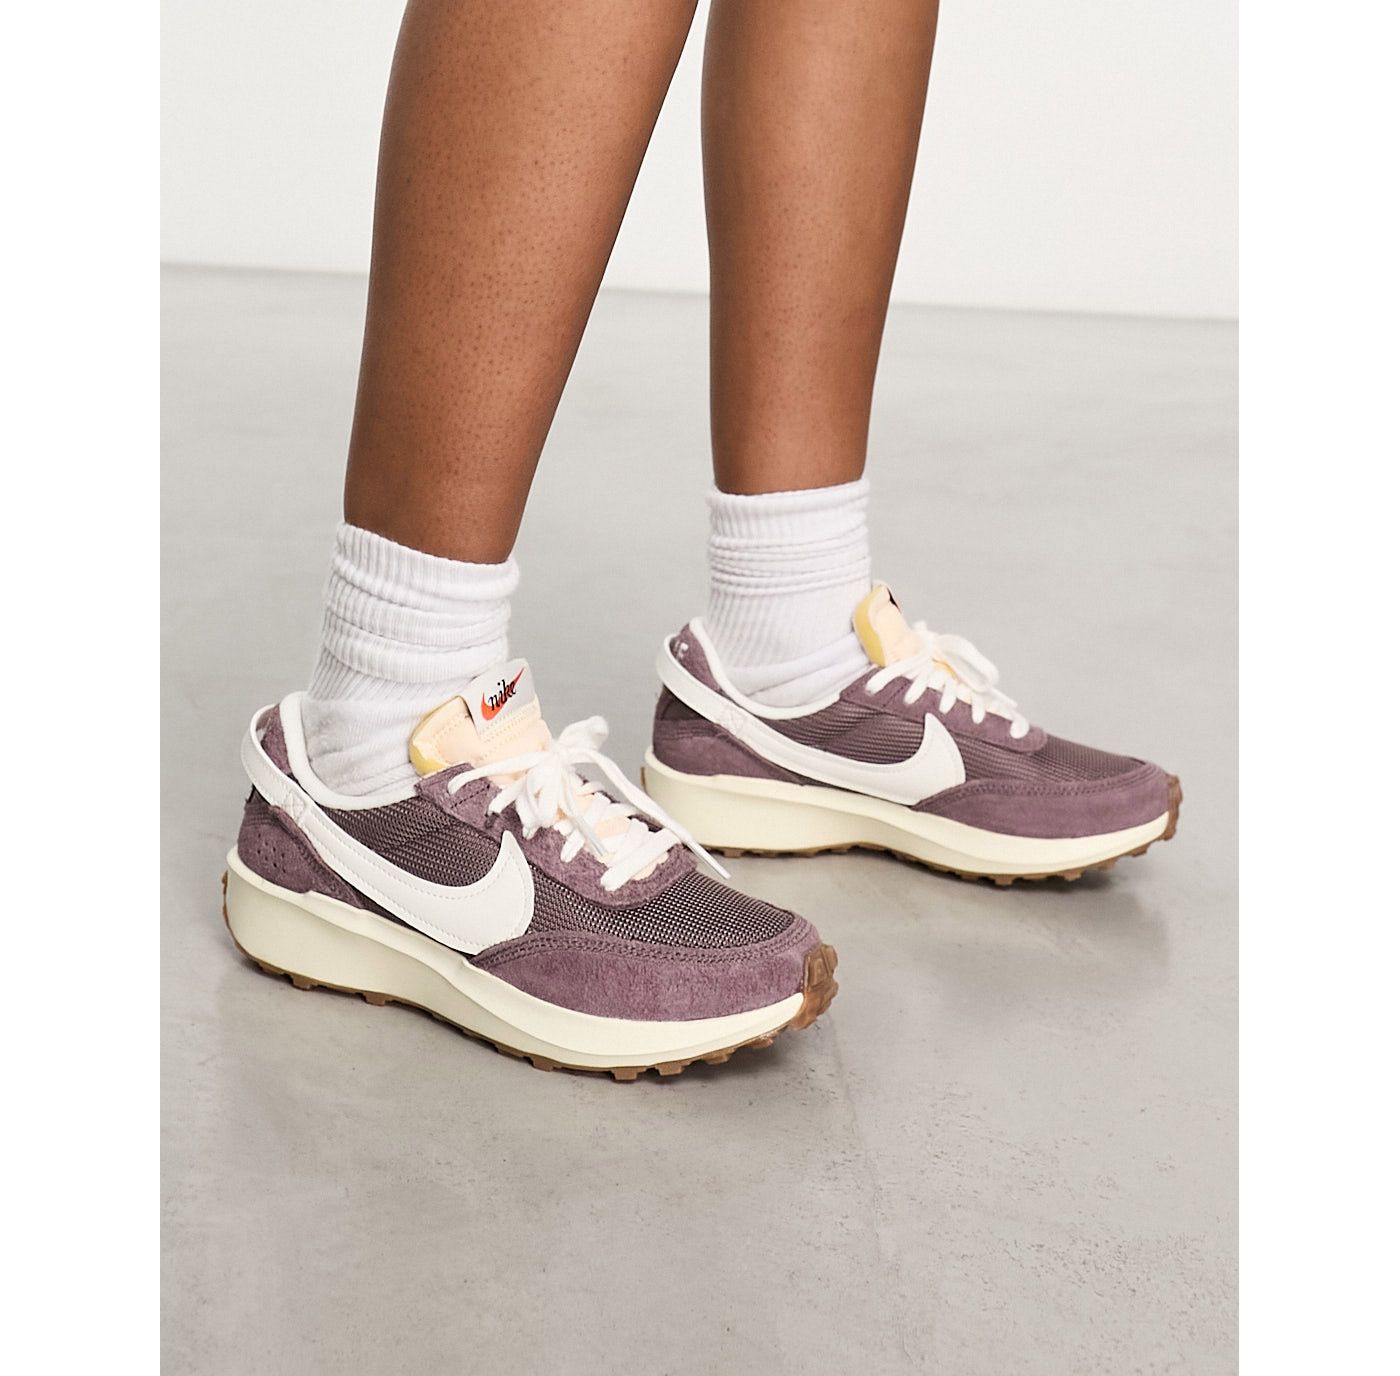 Nike Waffle Debut trainers in plum and off white